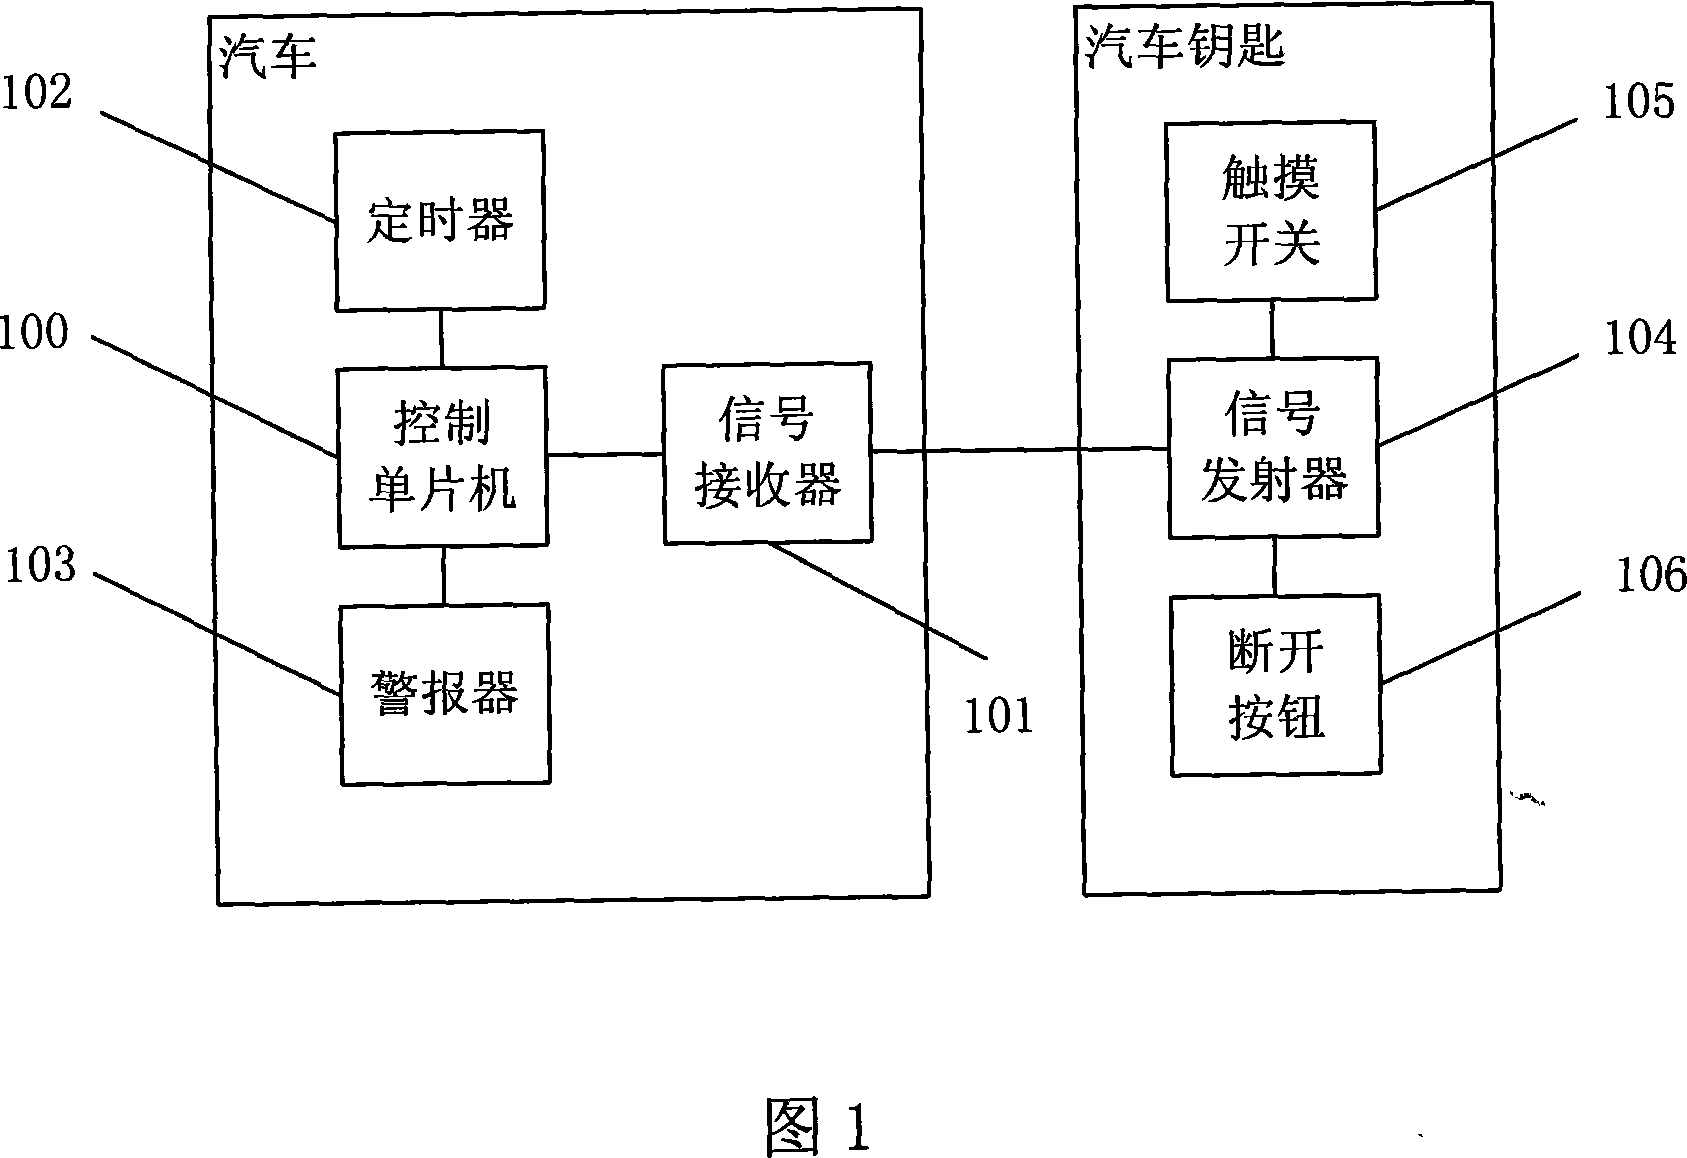 Automobile key inverse-locking protection method and system